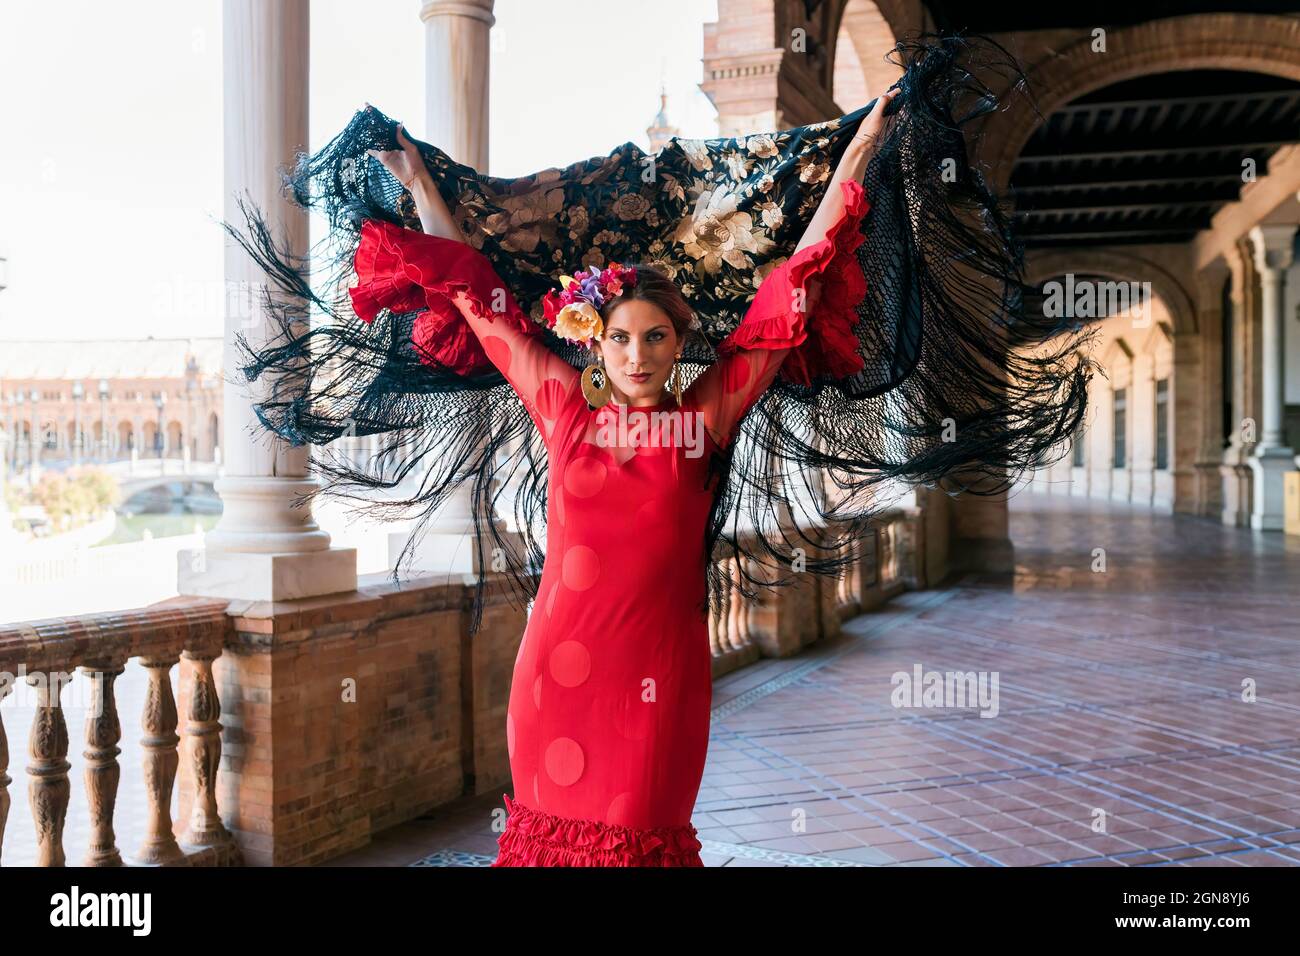 Female flamenco artist holding shawl with hands raised at Plaza De Espana walkway in Seville, Spain Stock Photo